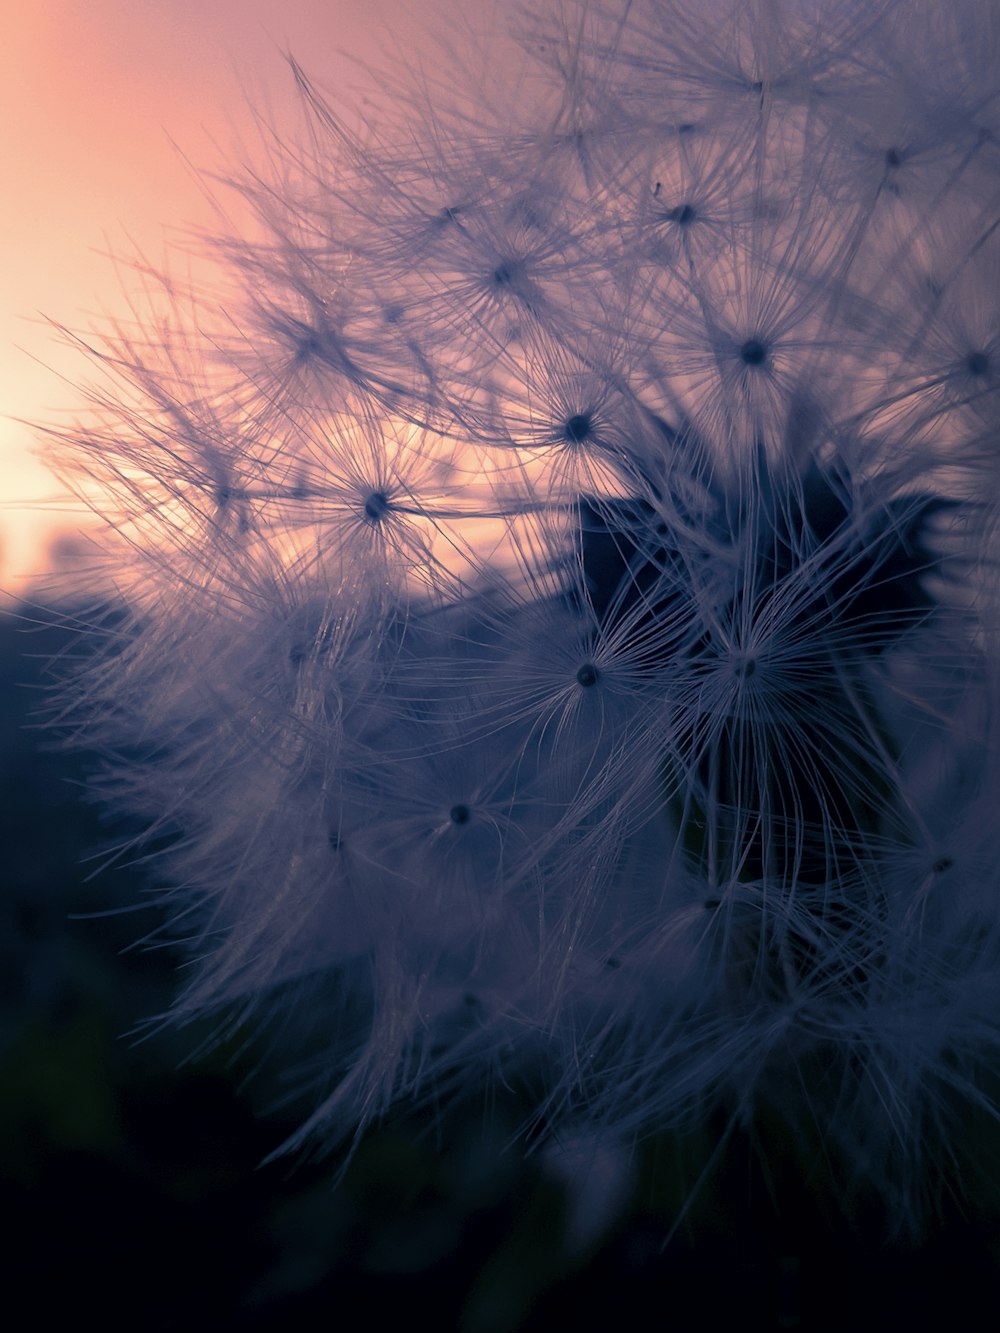 a close up of a dandelion with a sunset in the background